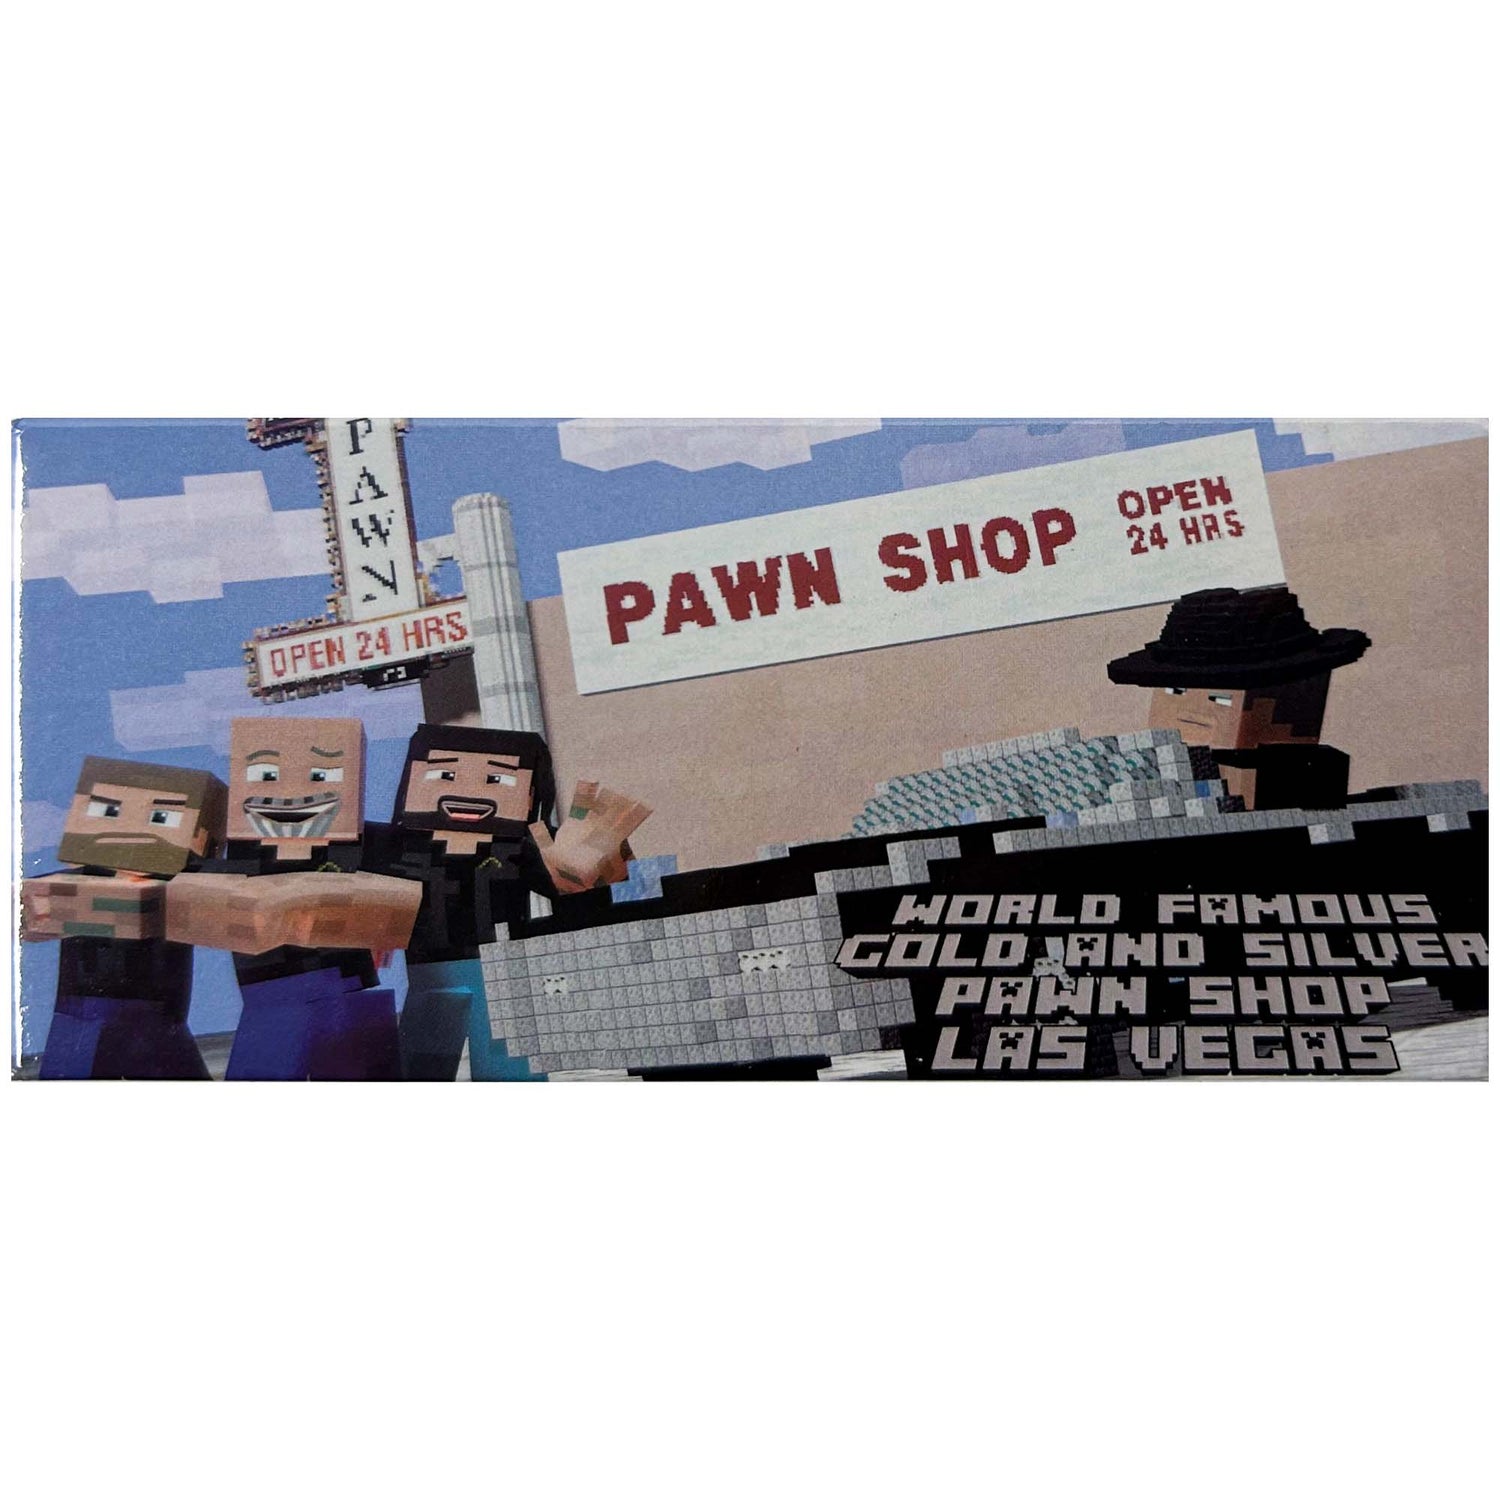 Gold & Silver Pawn Shop Magnets Lego